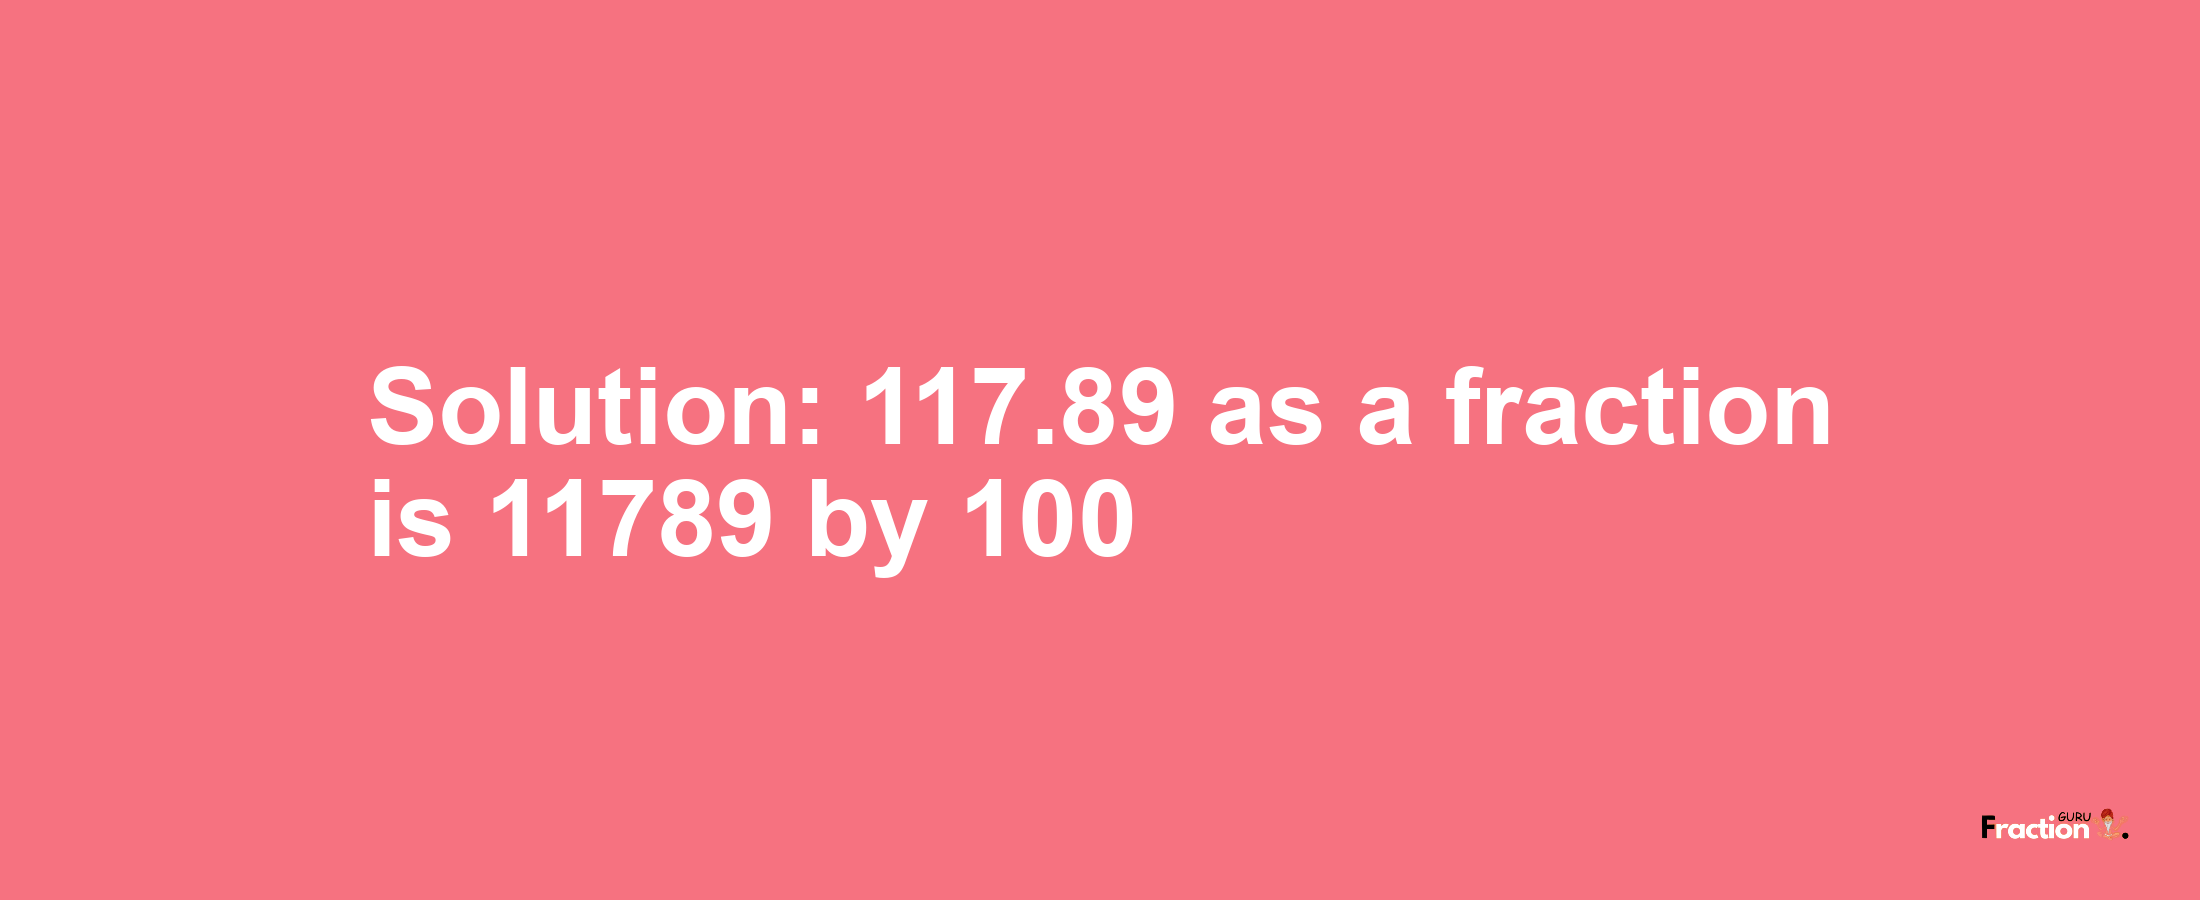 Solution:117.89 as a fraction is 11789/100